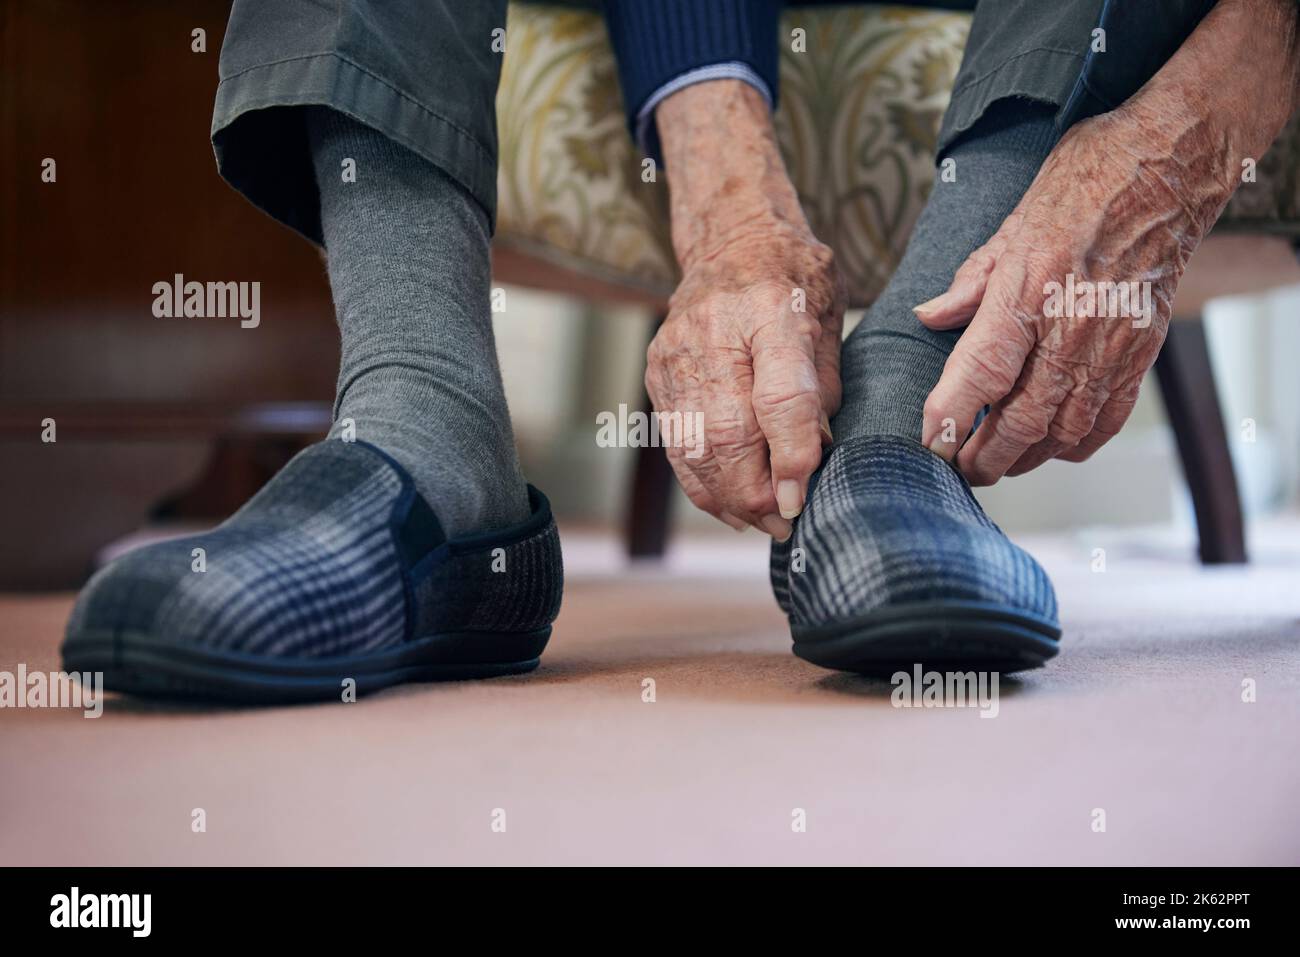 Close Up Of Senior Man Putting On Slippers To Keep Feet Warm In Cost Of Living Crisis Stock Photo